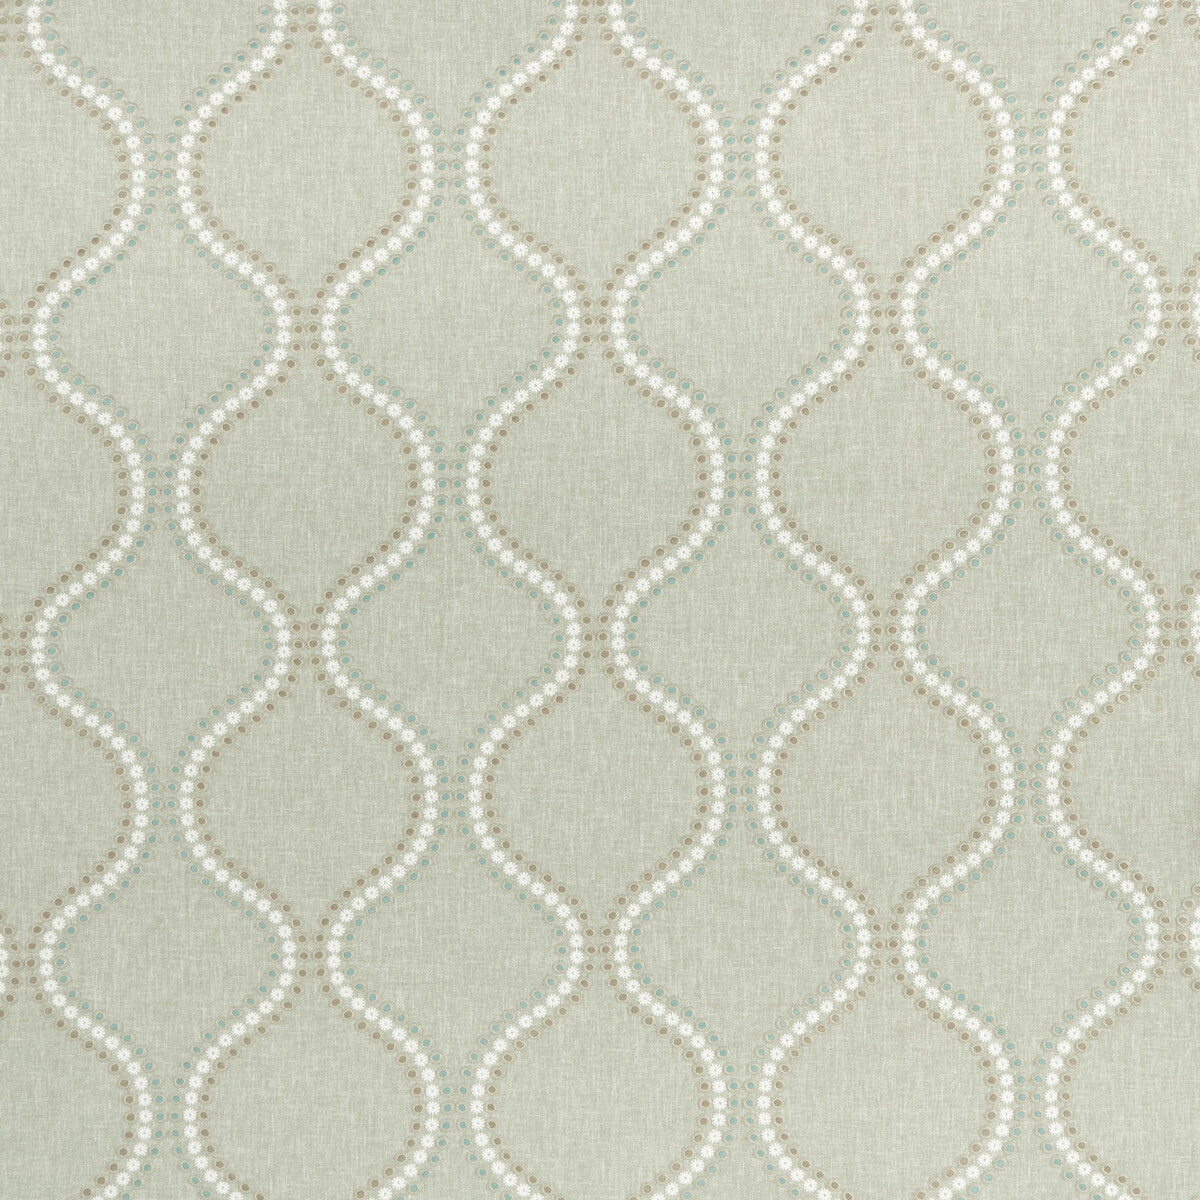 Layton fabric in duckegg color - pattern F1006/03.CAC.0 - by Clarke And Clarke in the Clarke &amp; Clarke Halcyon collection